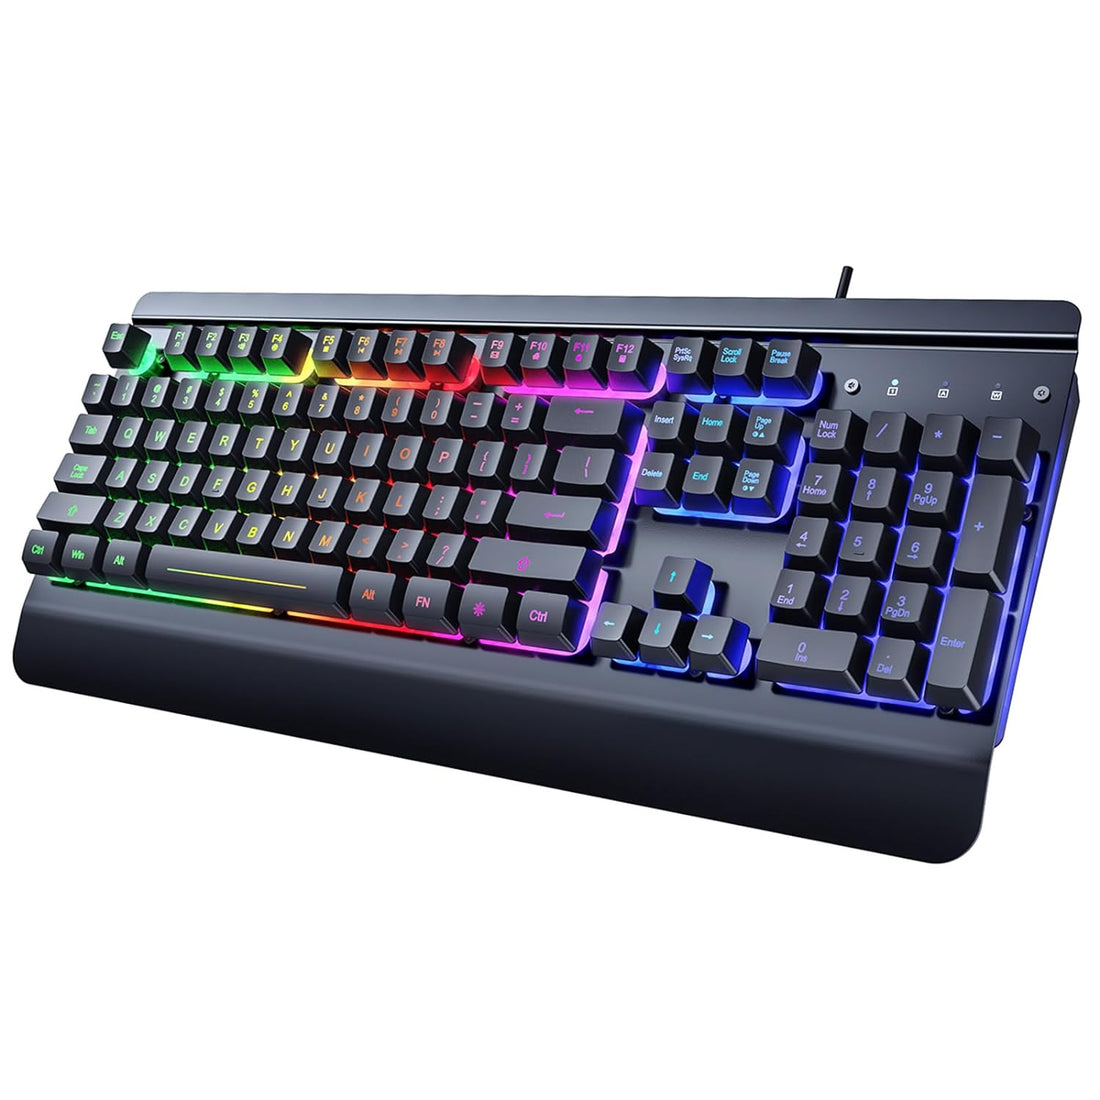 Gaming Keyboard, 104 Keys All-Metal Panel, Dacoity Rainbow LED Backlight Quiet Keyboard, Wrist Rest, Waterproof Light-Up USB Wired Keyboard for Office PC, Mac Xbox